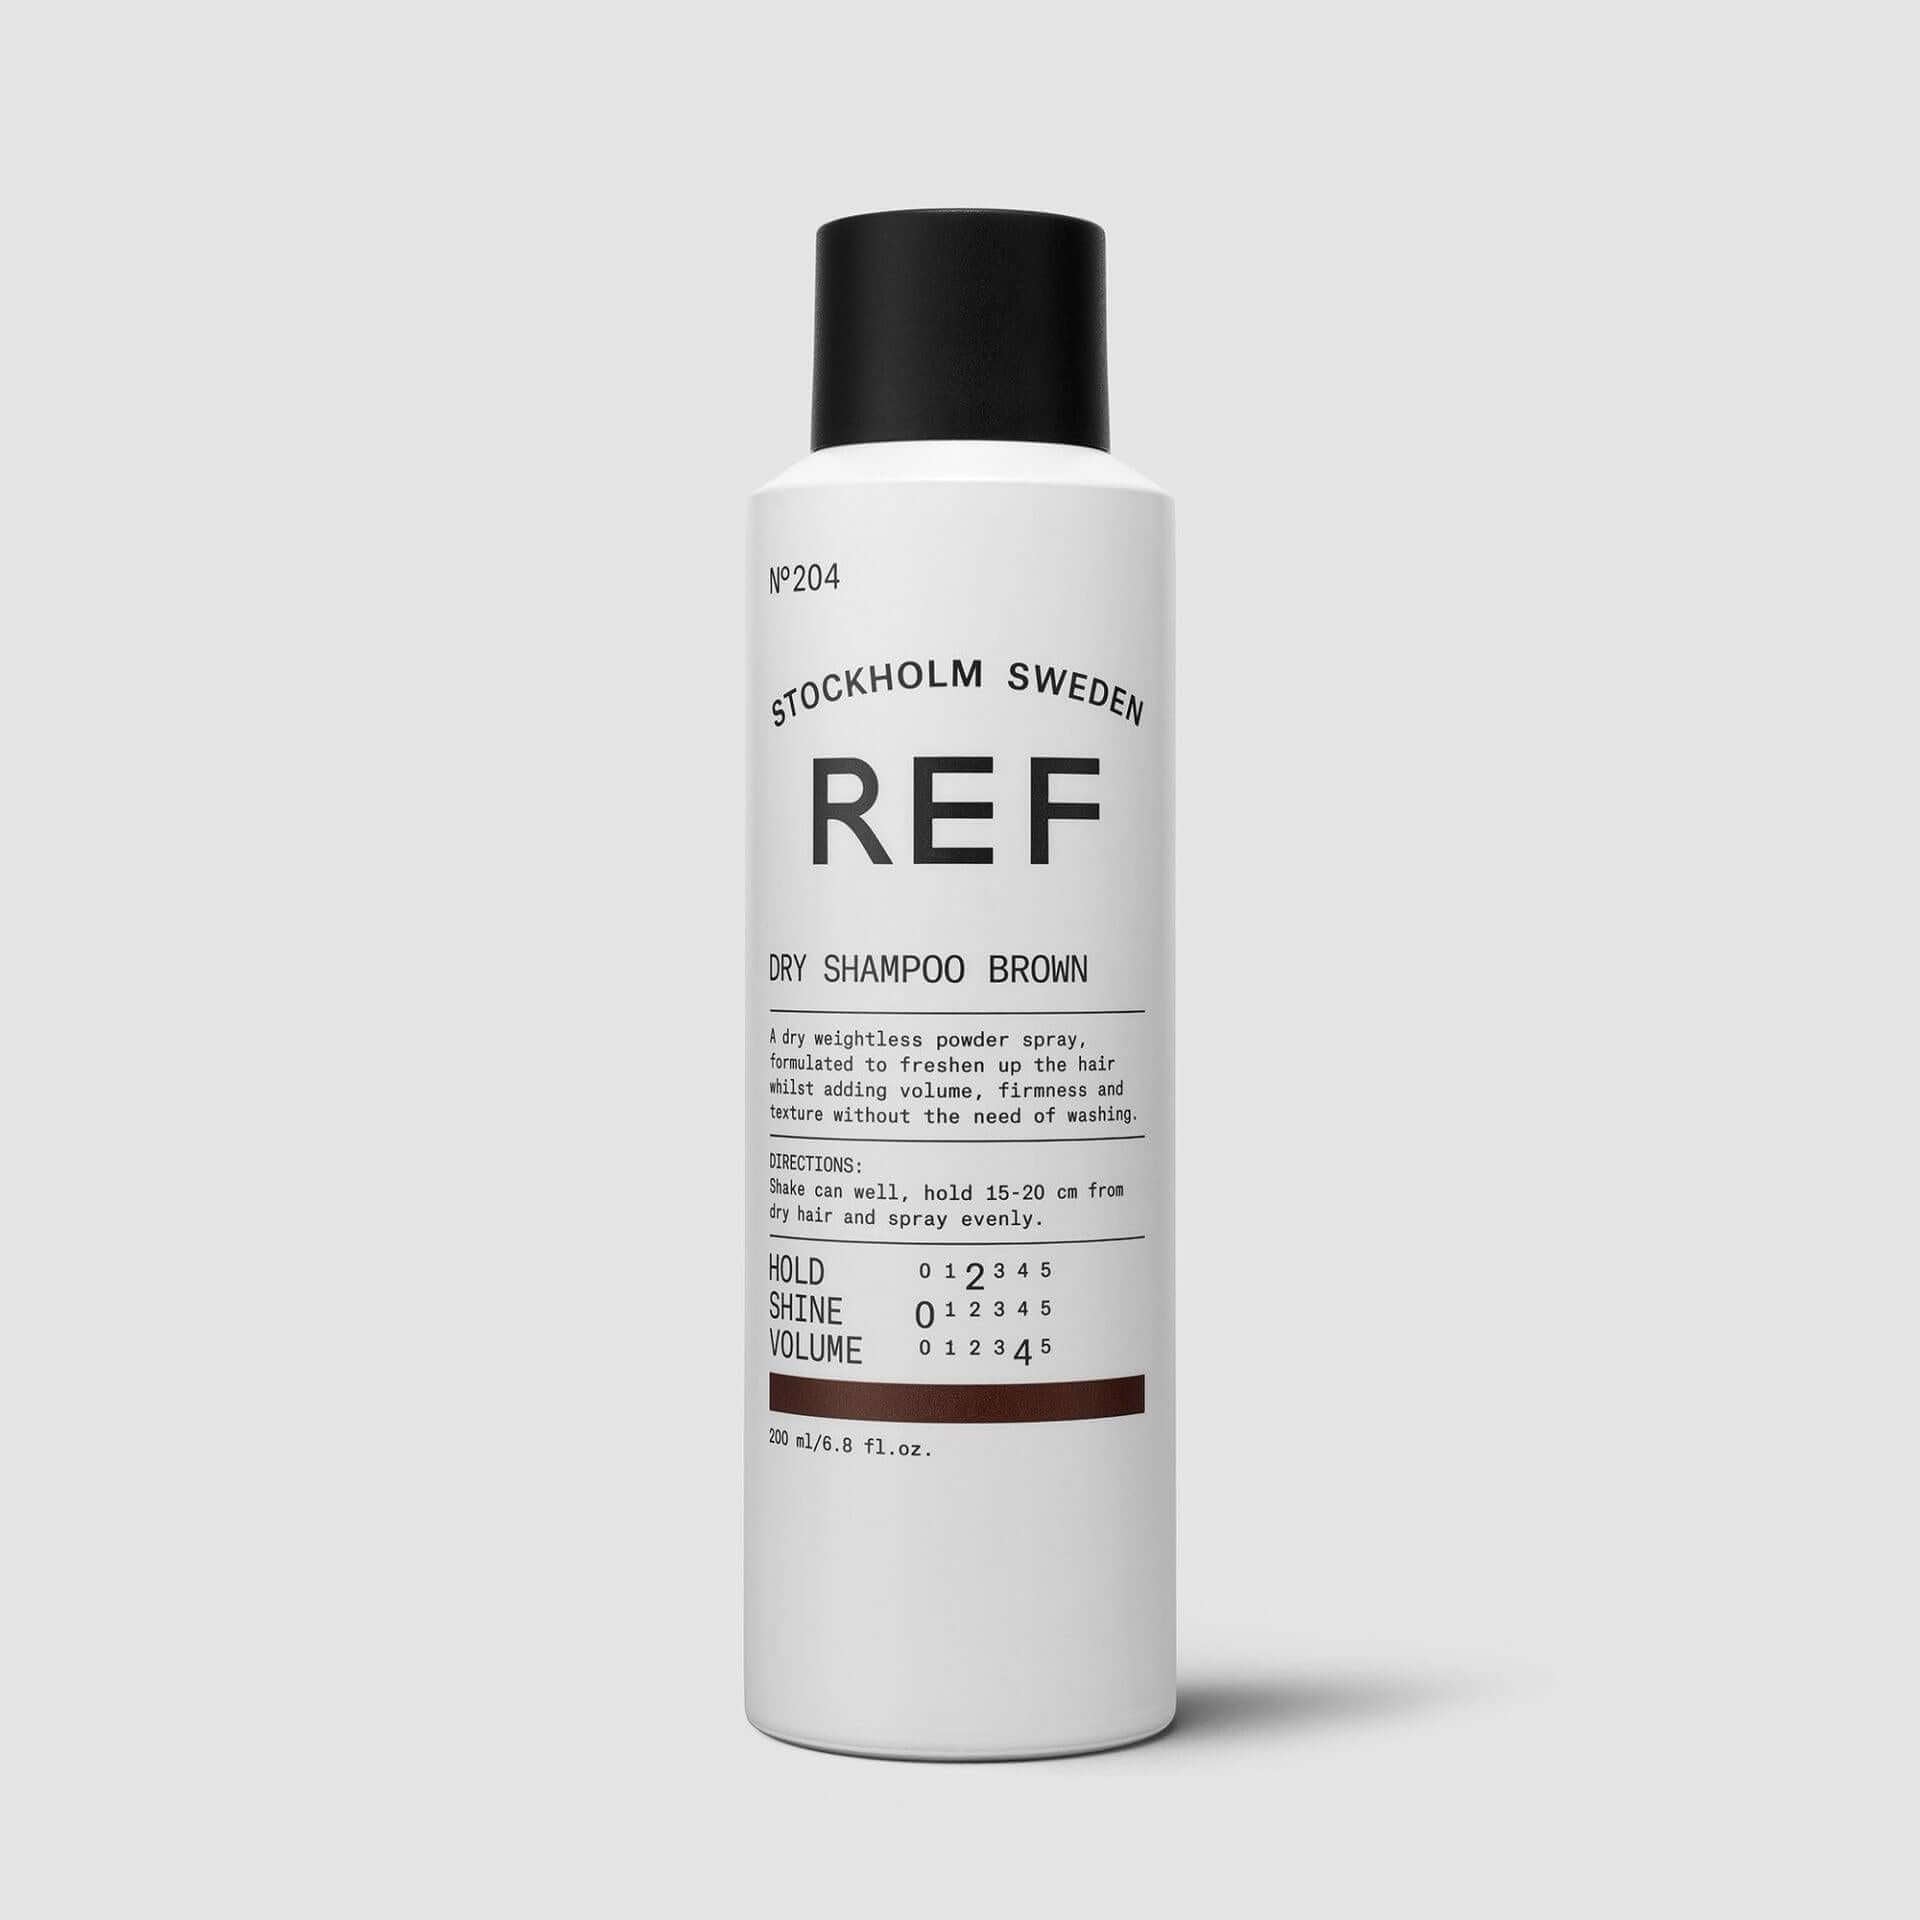 REF STOCKHOLM SWEDEN Dry Shampoo 204 a Hair Styling Products from Simply Colour Hair Salon Studio & Online Store